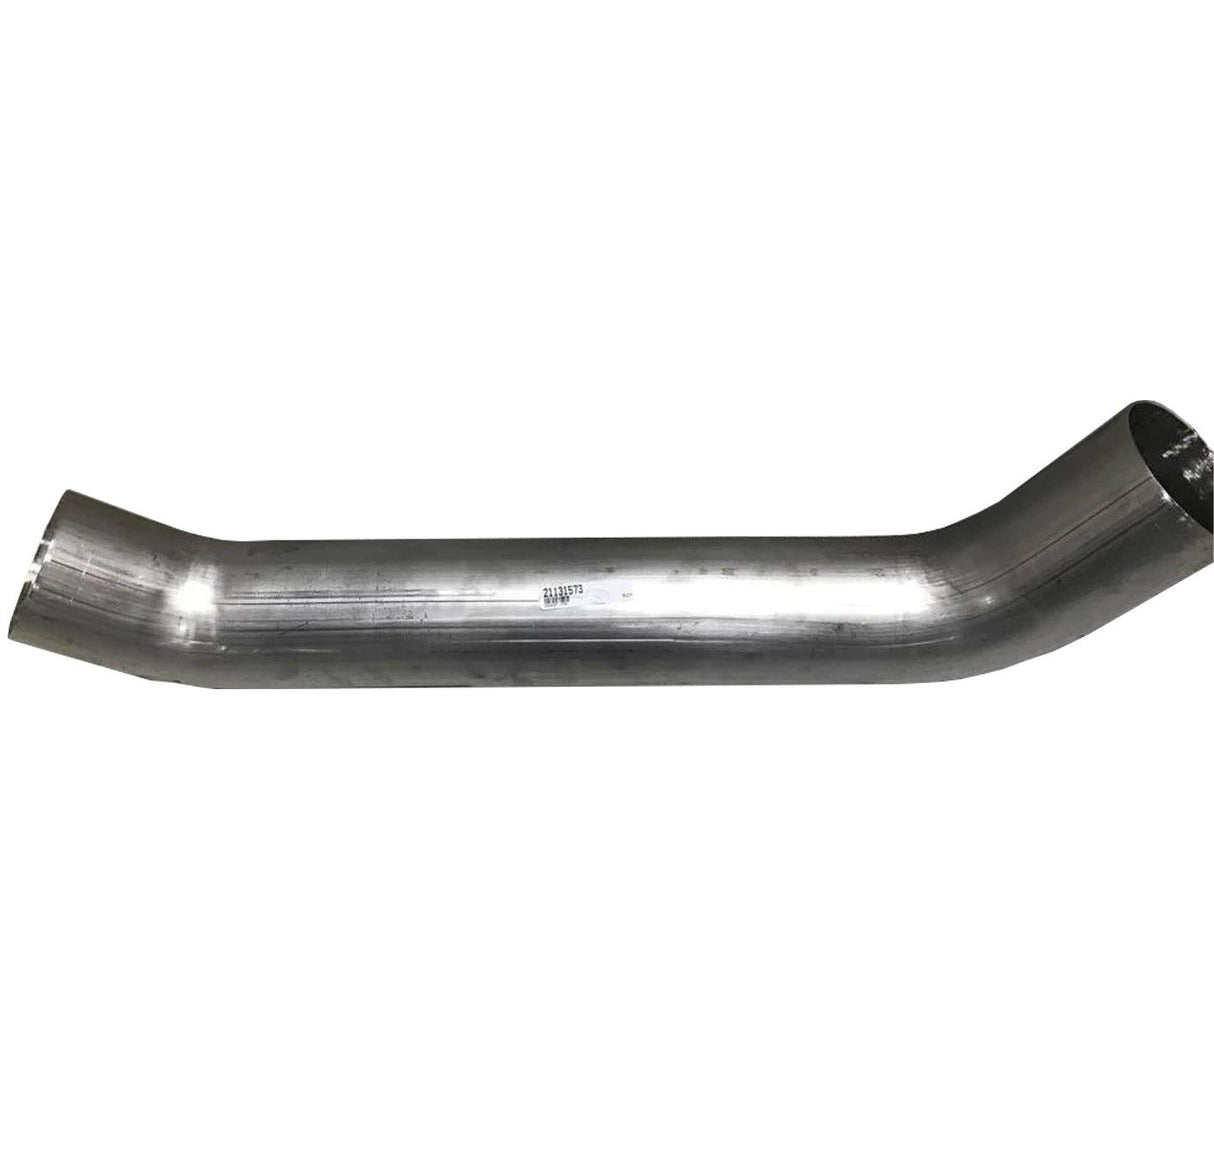 21131573 Genuine Volvo Exhaust Pipe - Truck To Trailer